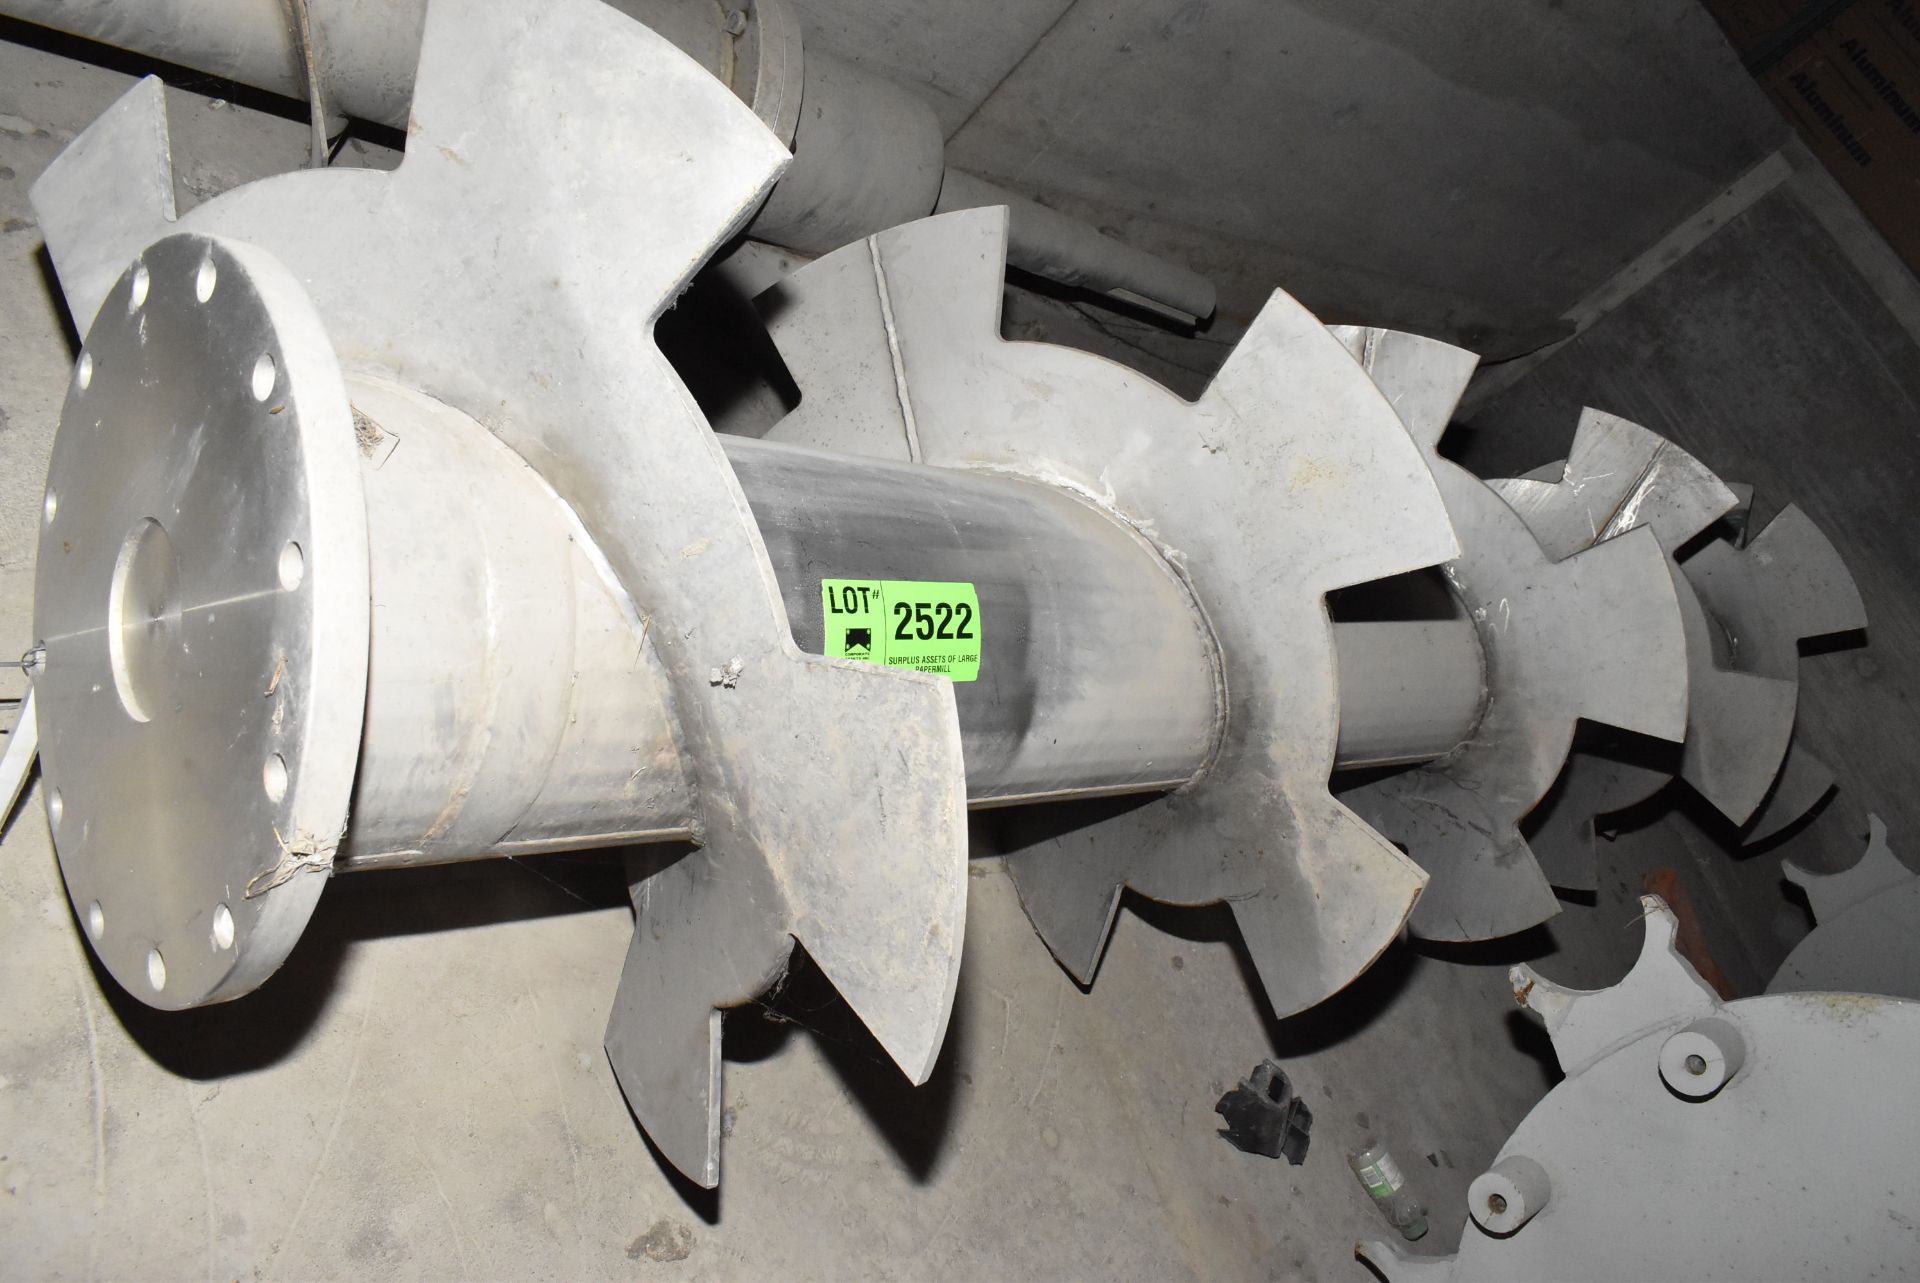 MFG. UNKNOWN 124" STAINLESS STEEL AUGER (CI) [RIGGING FEE FOR LOT #2522 - $150 USD PLUS APPLICABLE